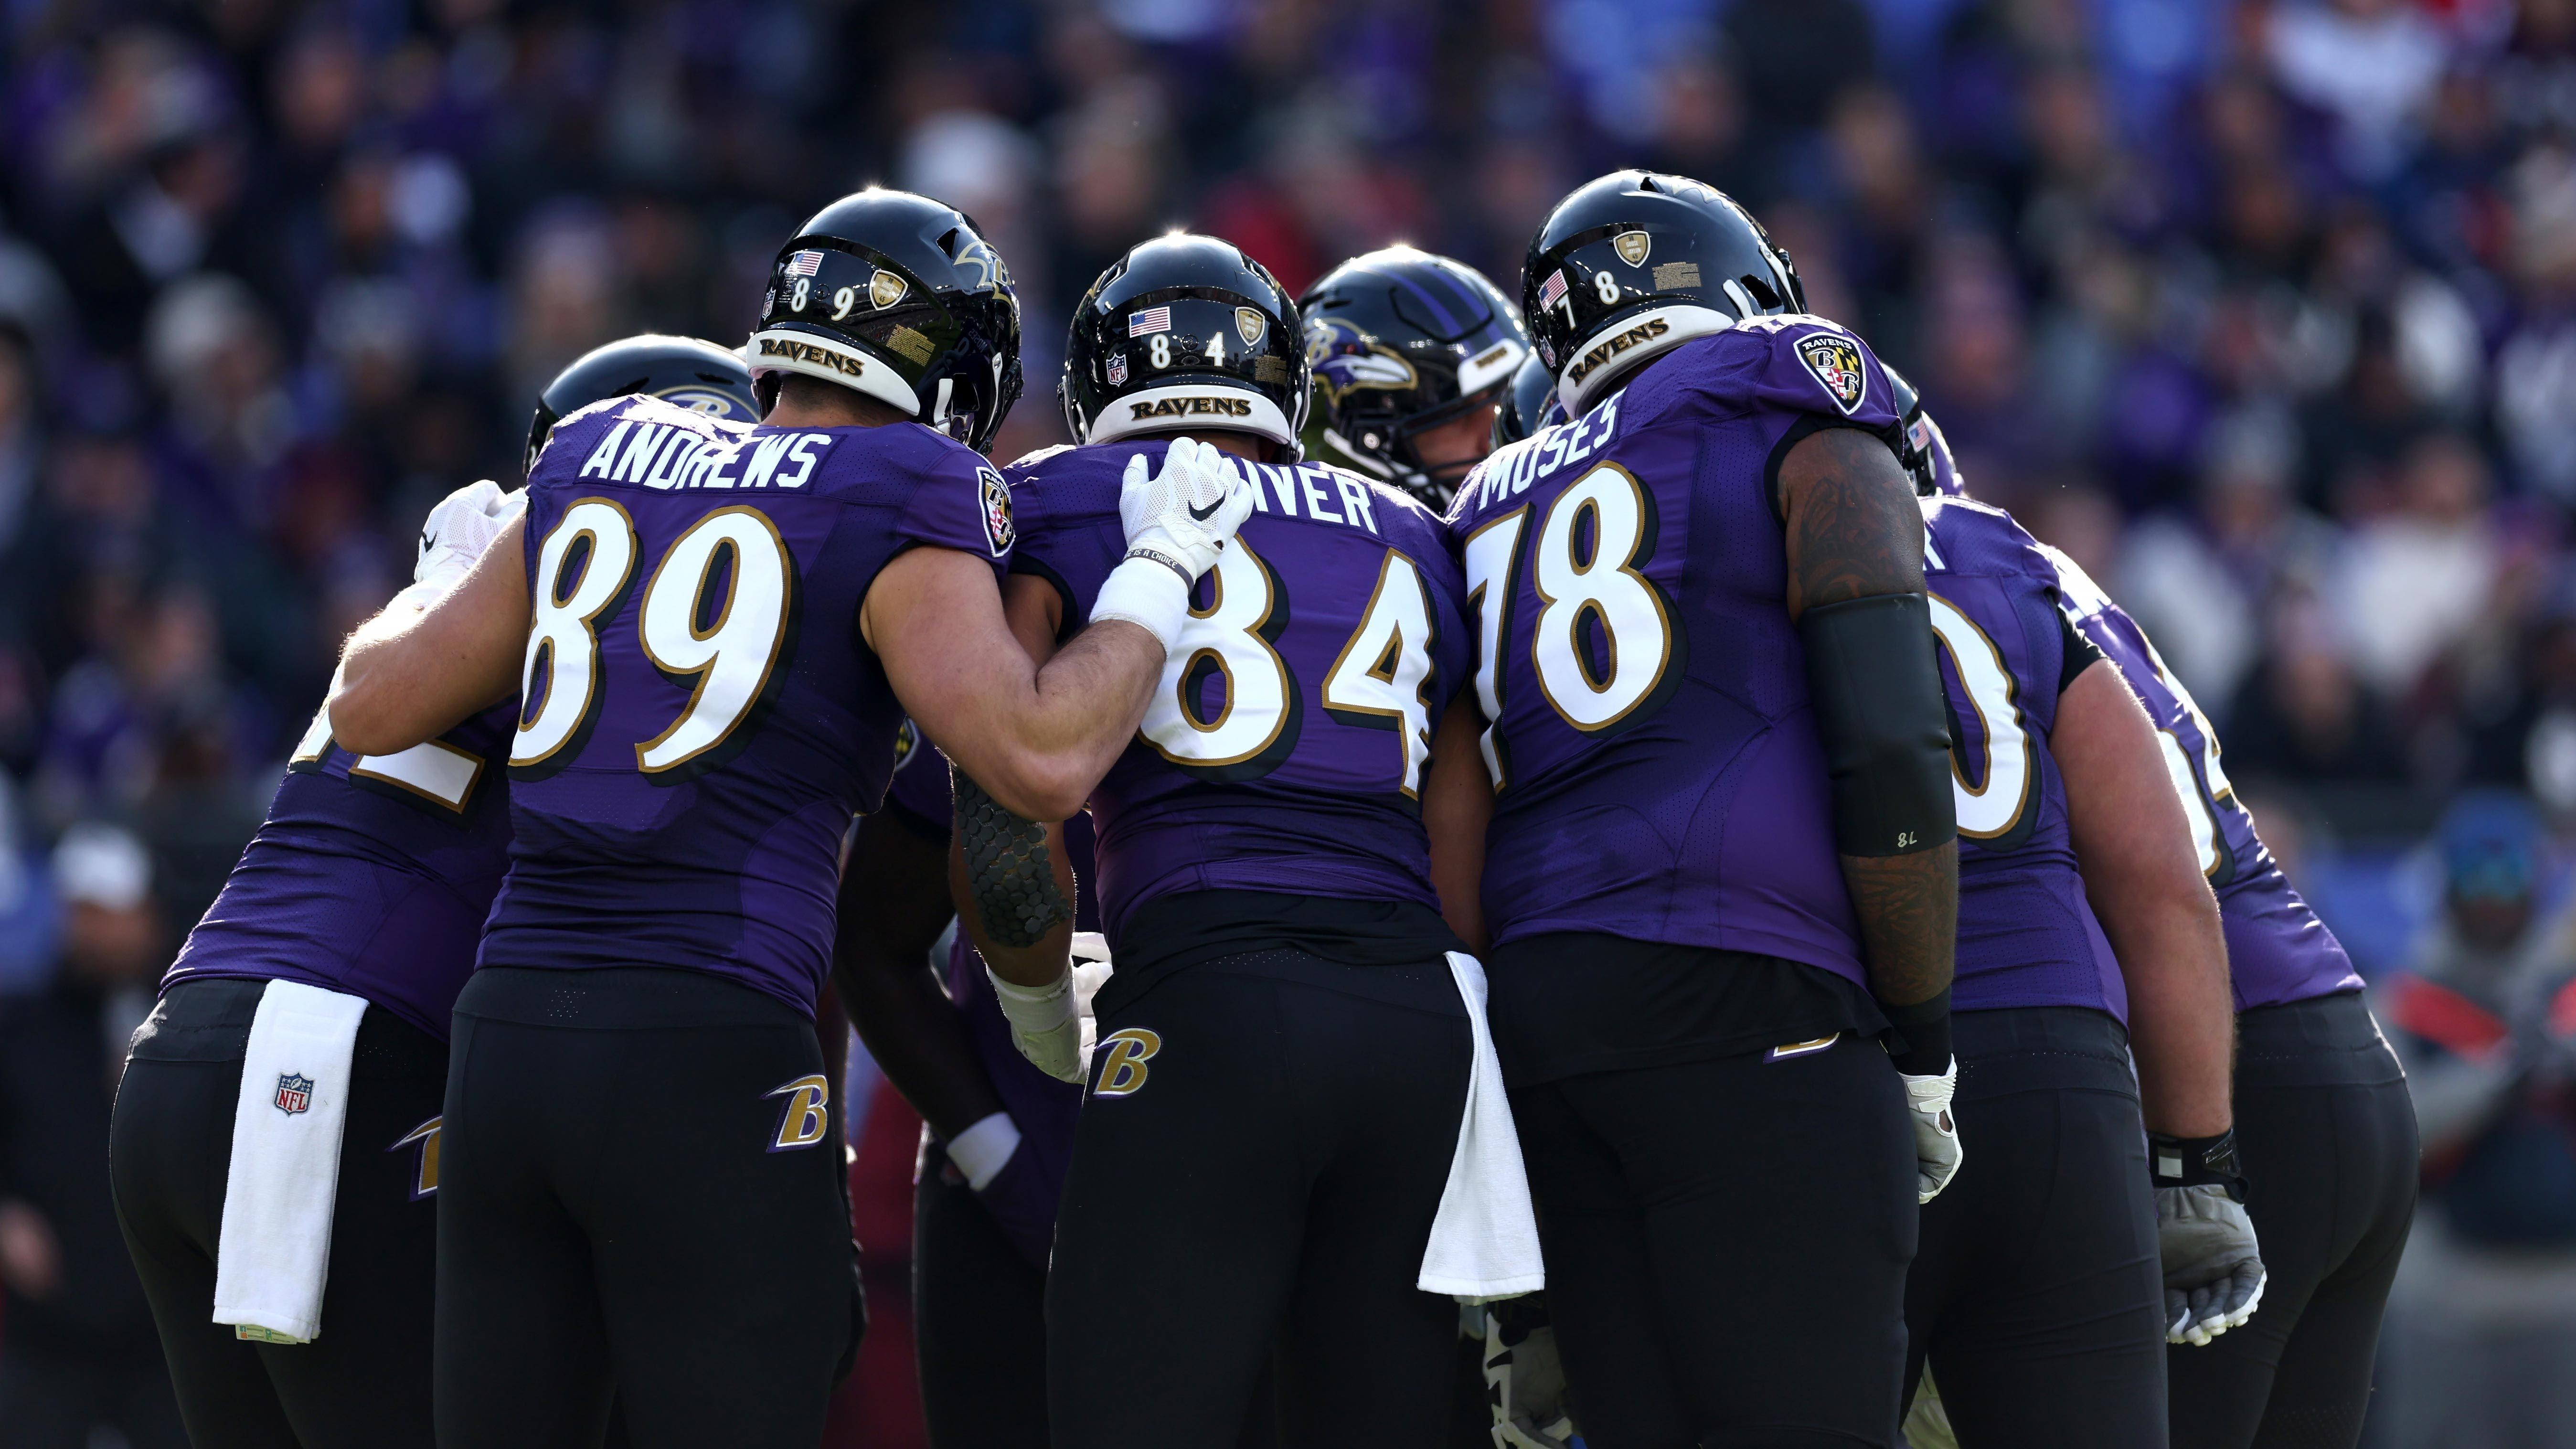 
                <strong>Sechs Picks: Baltimore Ravens</strong><br>
                &#x2022; Runde 1<br>&#x2022; Runde 3<br>&#x2022; Runde 4<br>&#x2022; Runde 5 (via New England Patriots)<br>&#x2022; Runde 5<br>&#x2022; Runde 6<br>
              